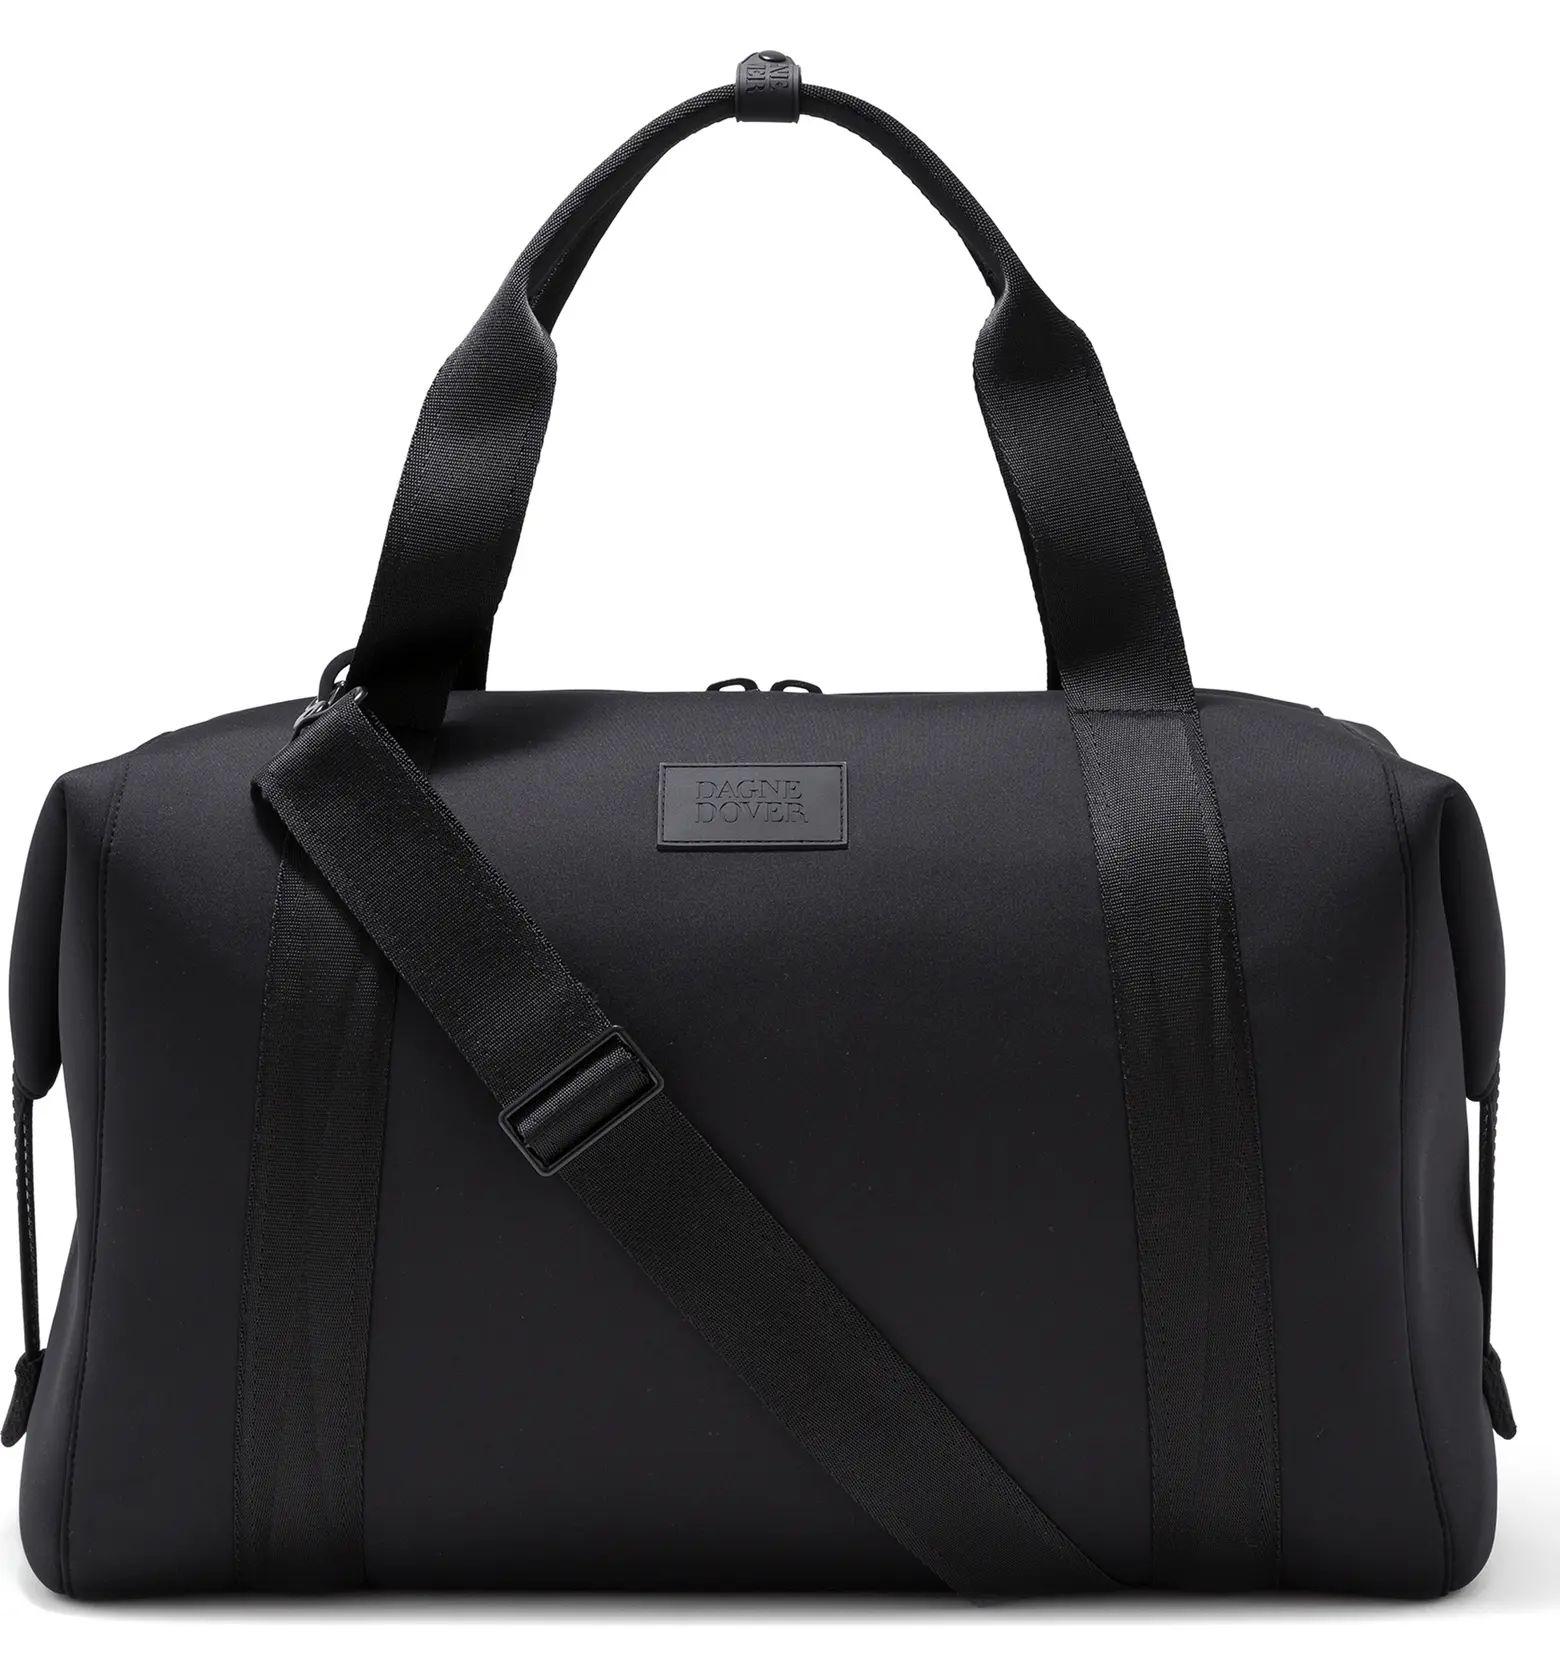 Landon Recycled Polyester Carryall Duffle | Nordstrom